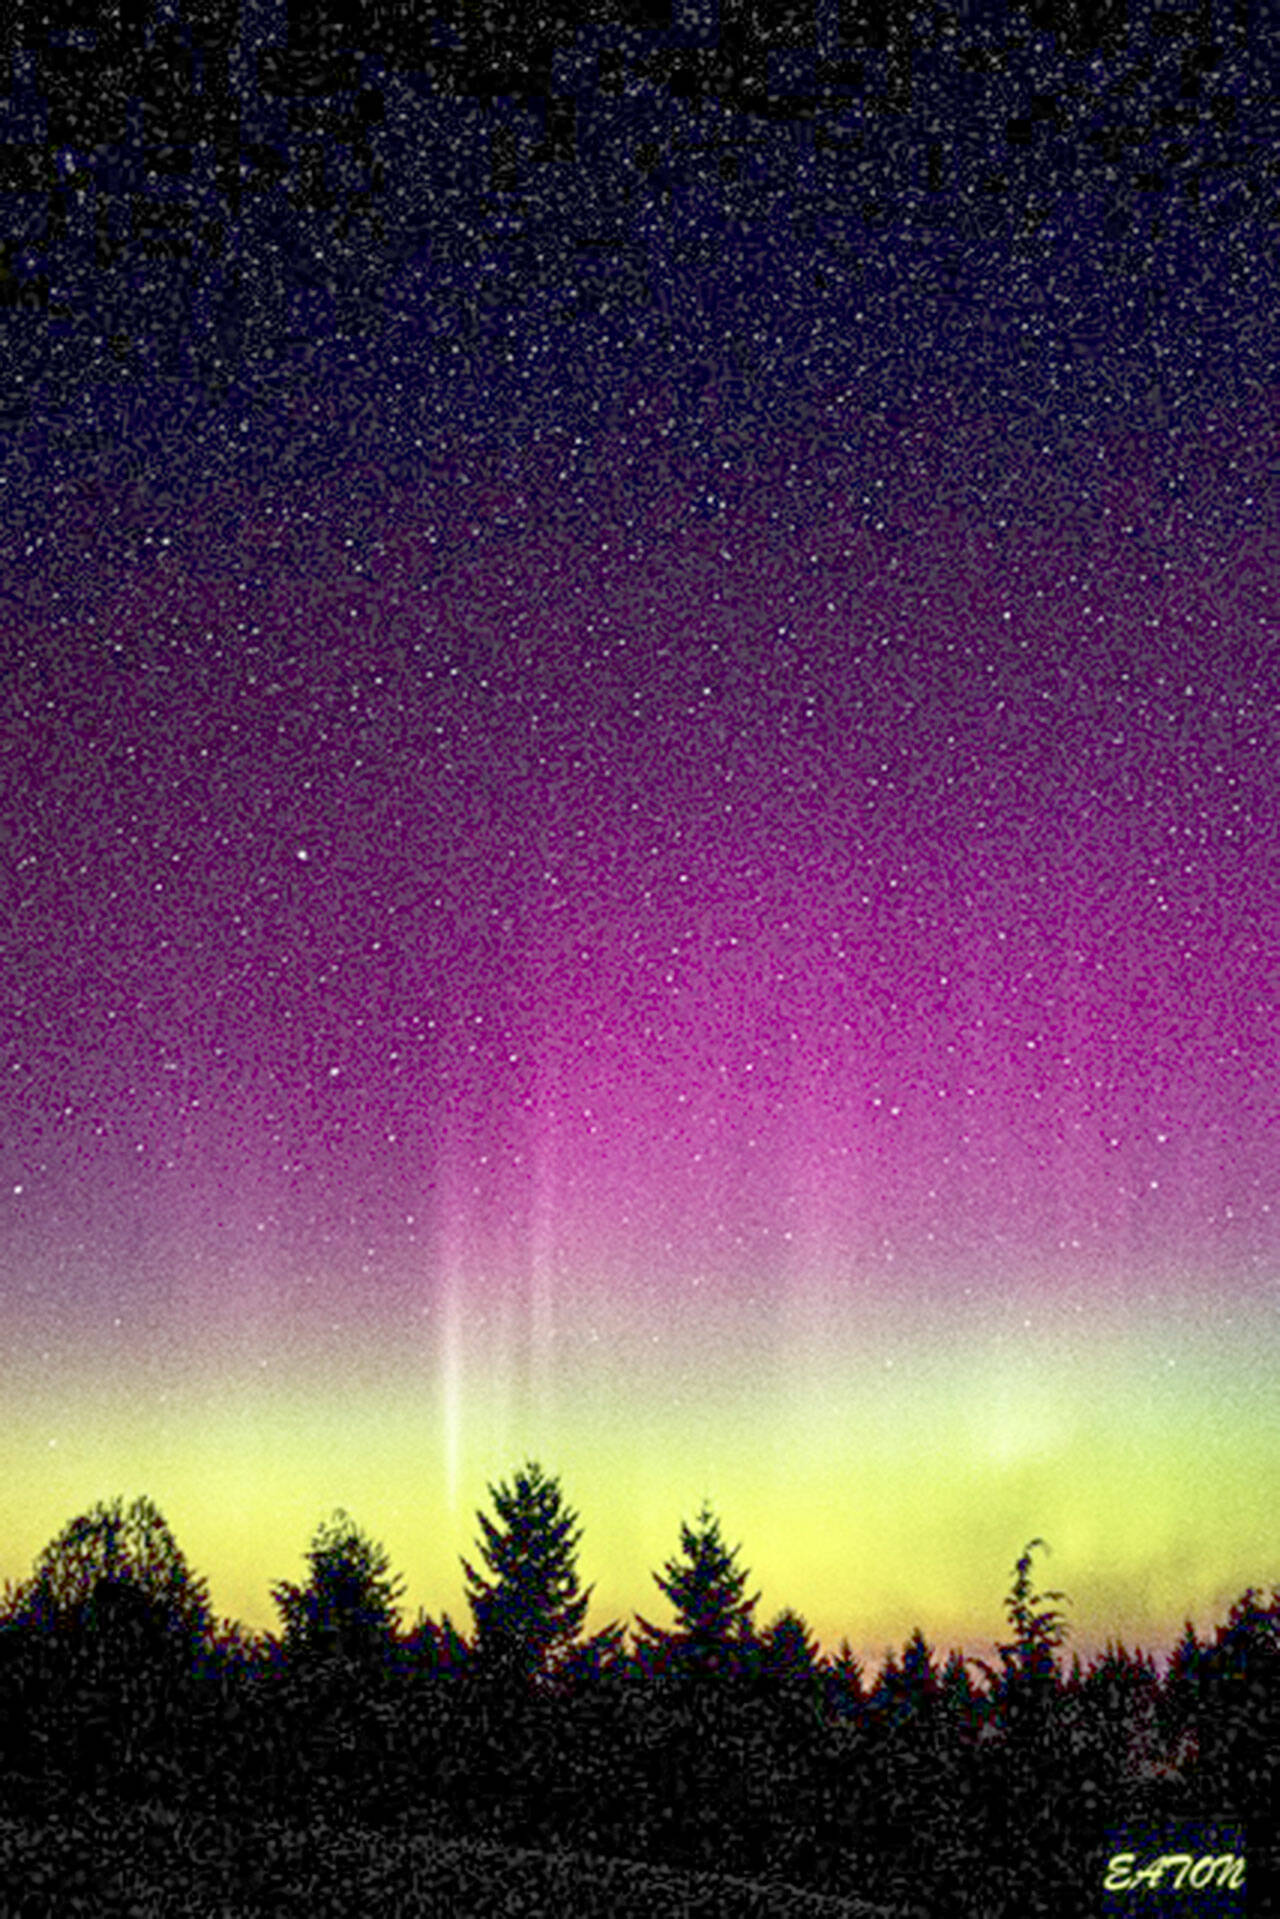 The Northern Lights are highlighted in photographs by KarenLee Eaton at Gallery 9.